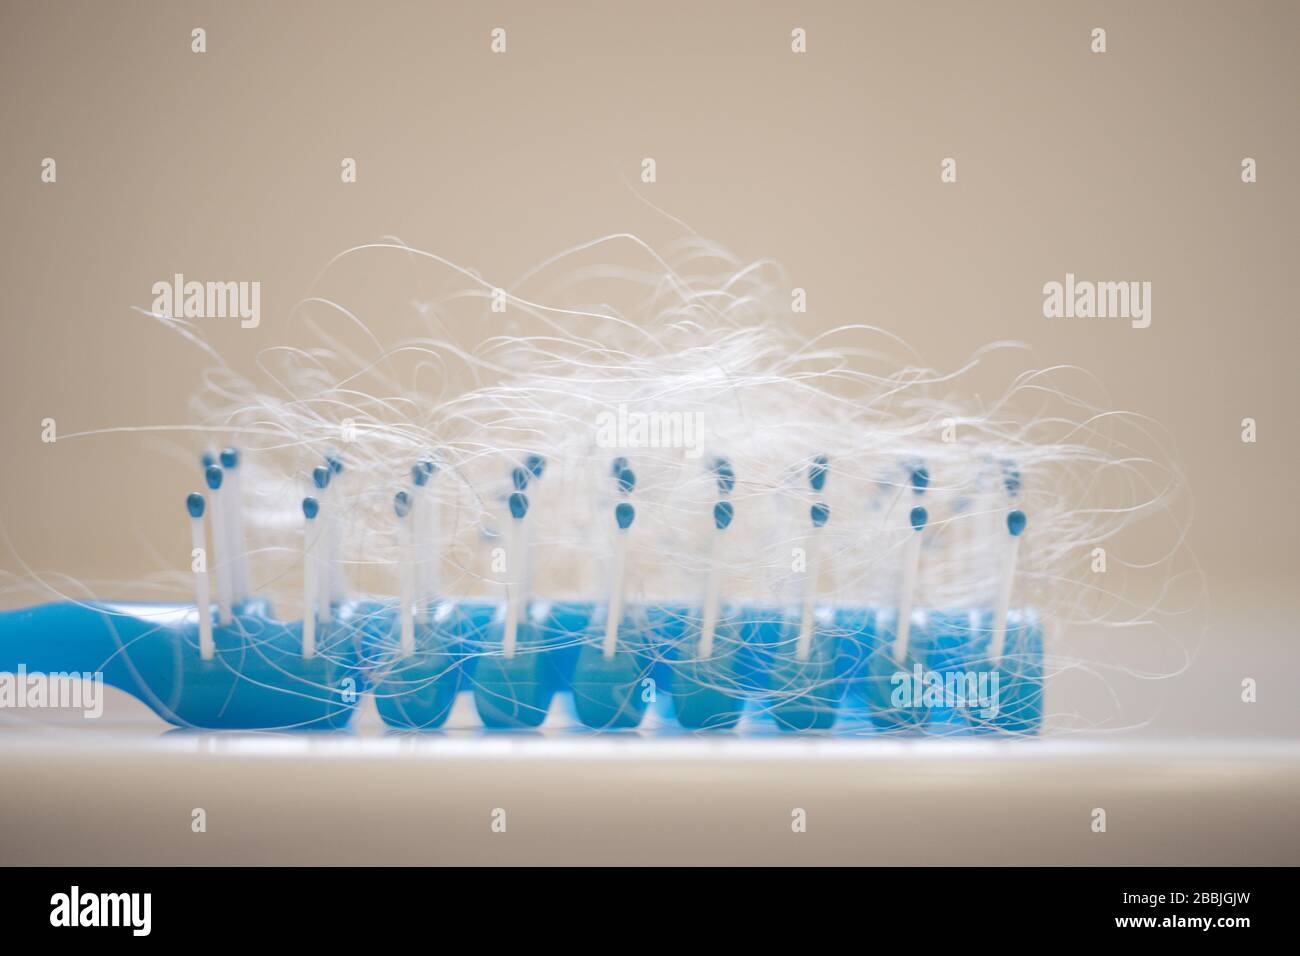 A lot of matted blond hair in a blue comb, side view on a bathroom shelf Stock Photo